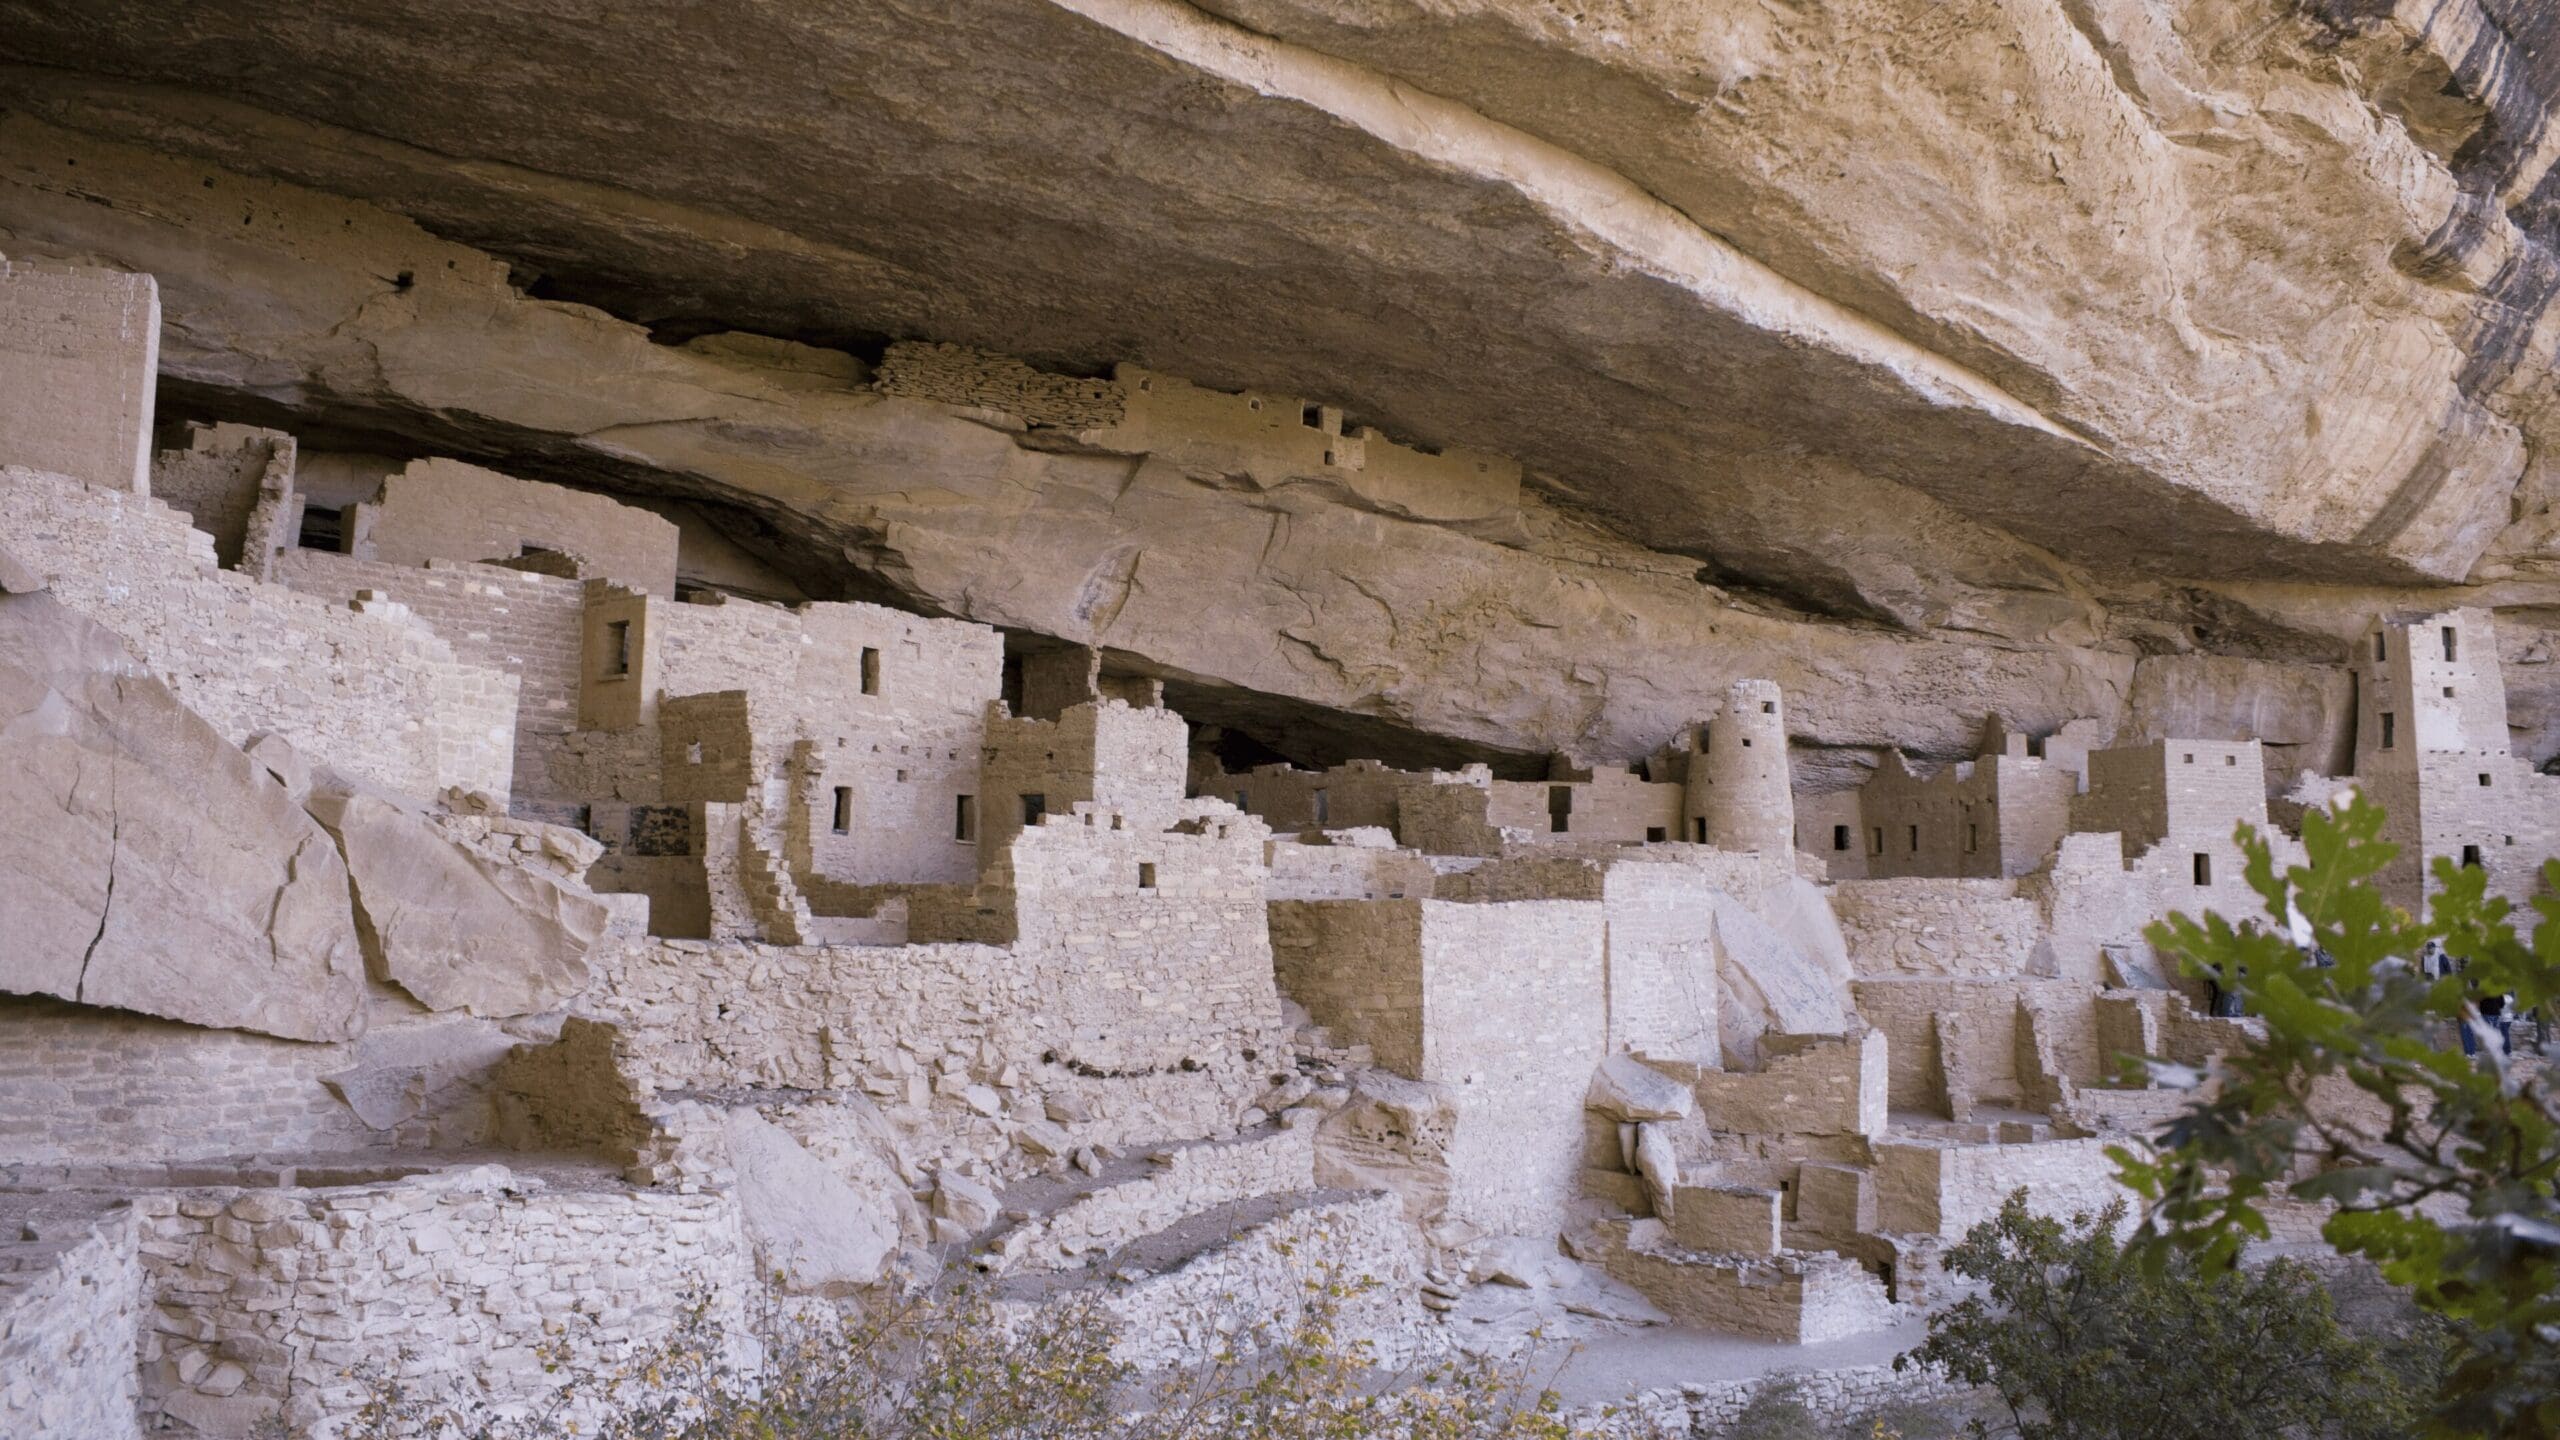 Adobe dwellings tucked up under the cliffs of mesa verde national park